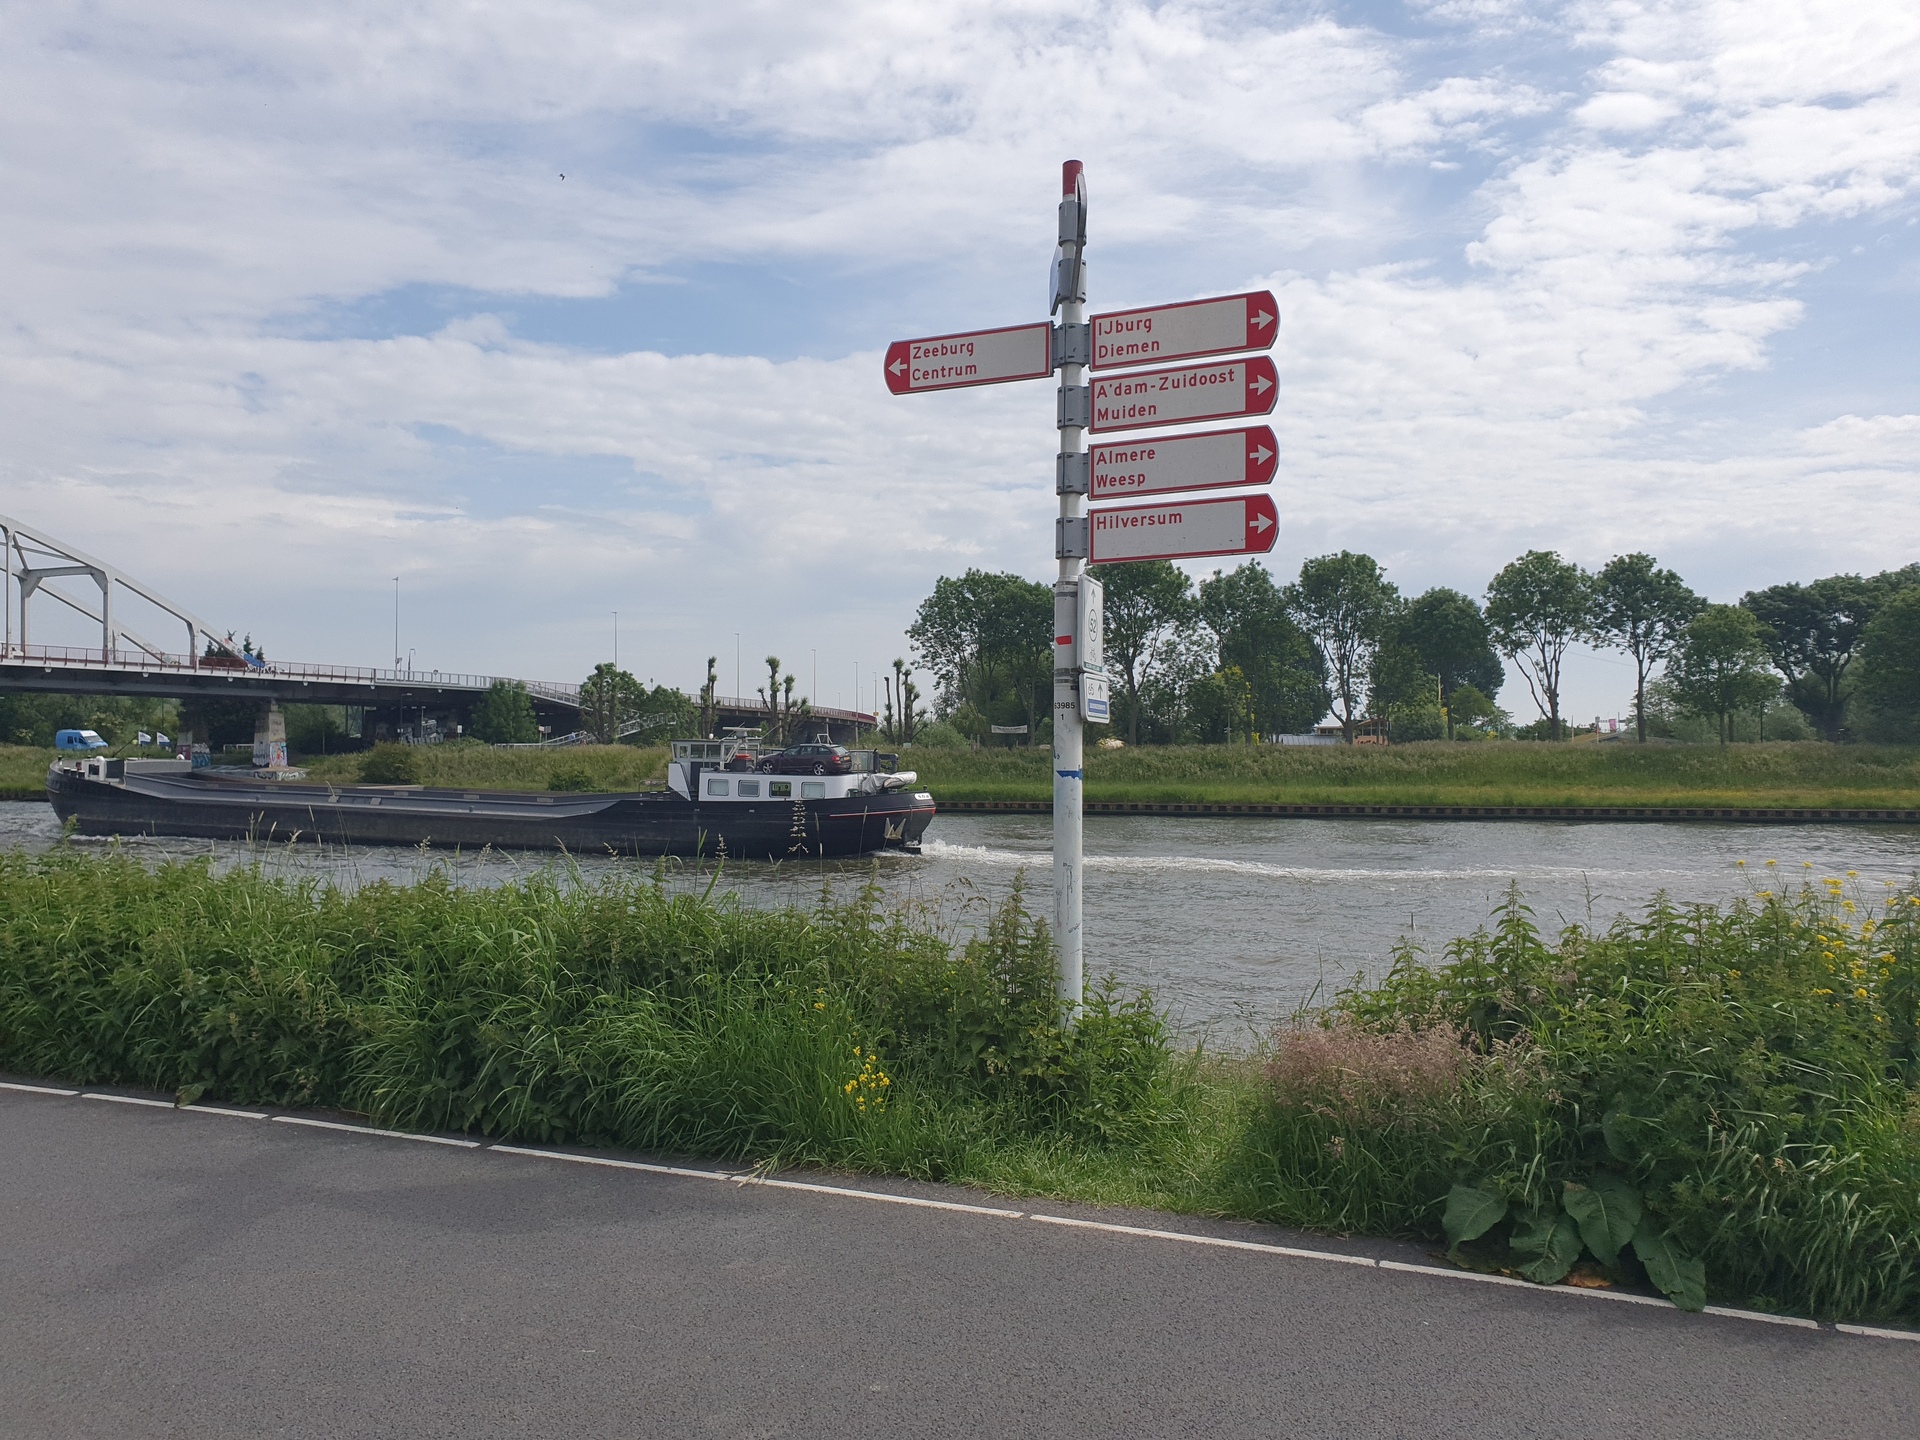 Signage showing the way to Almere